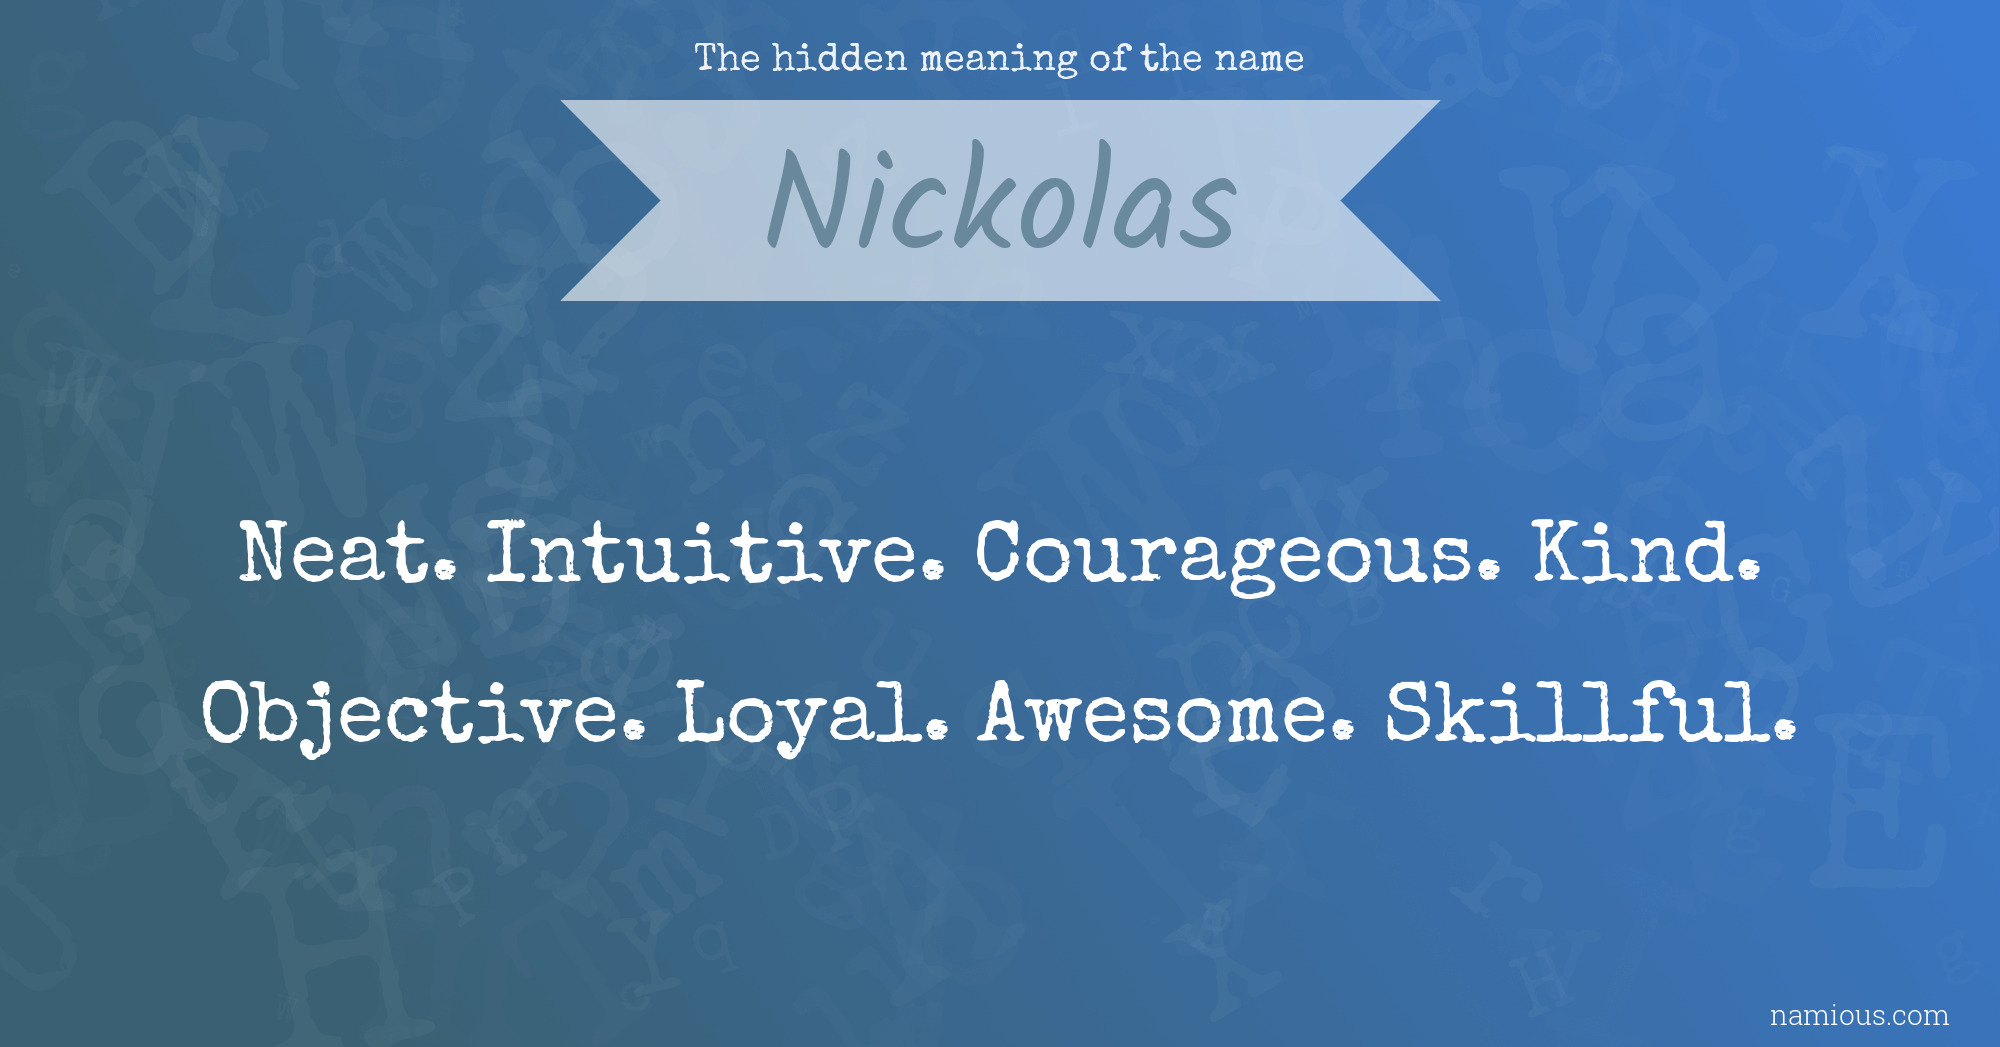 The hidden meaning of the name Nickolas